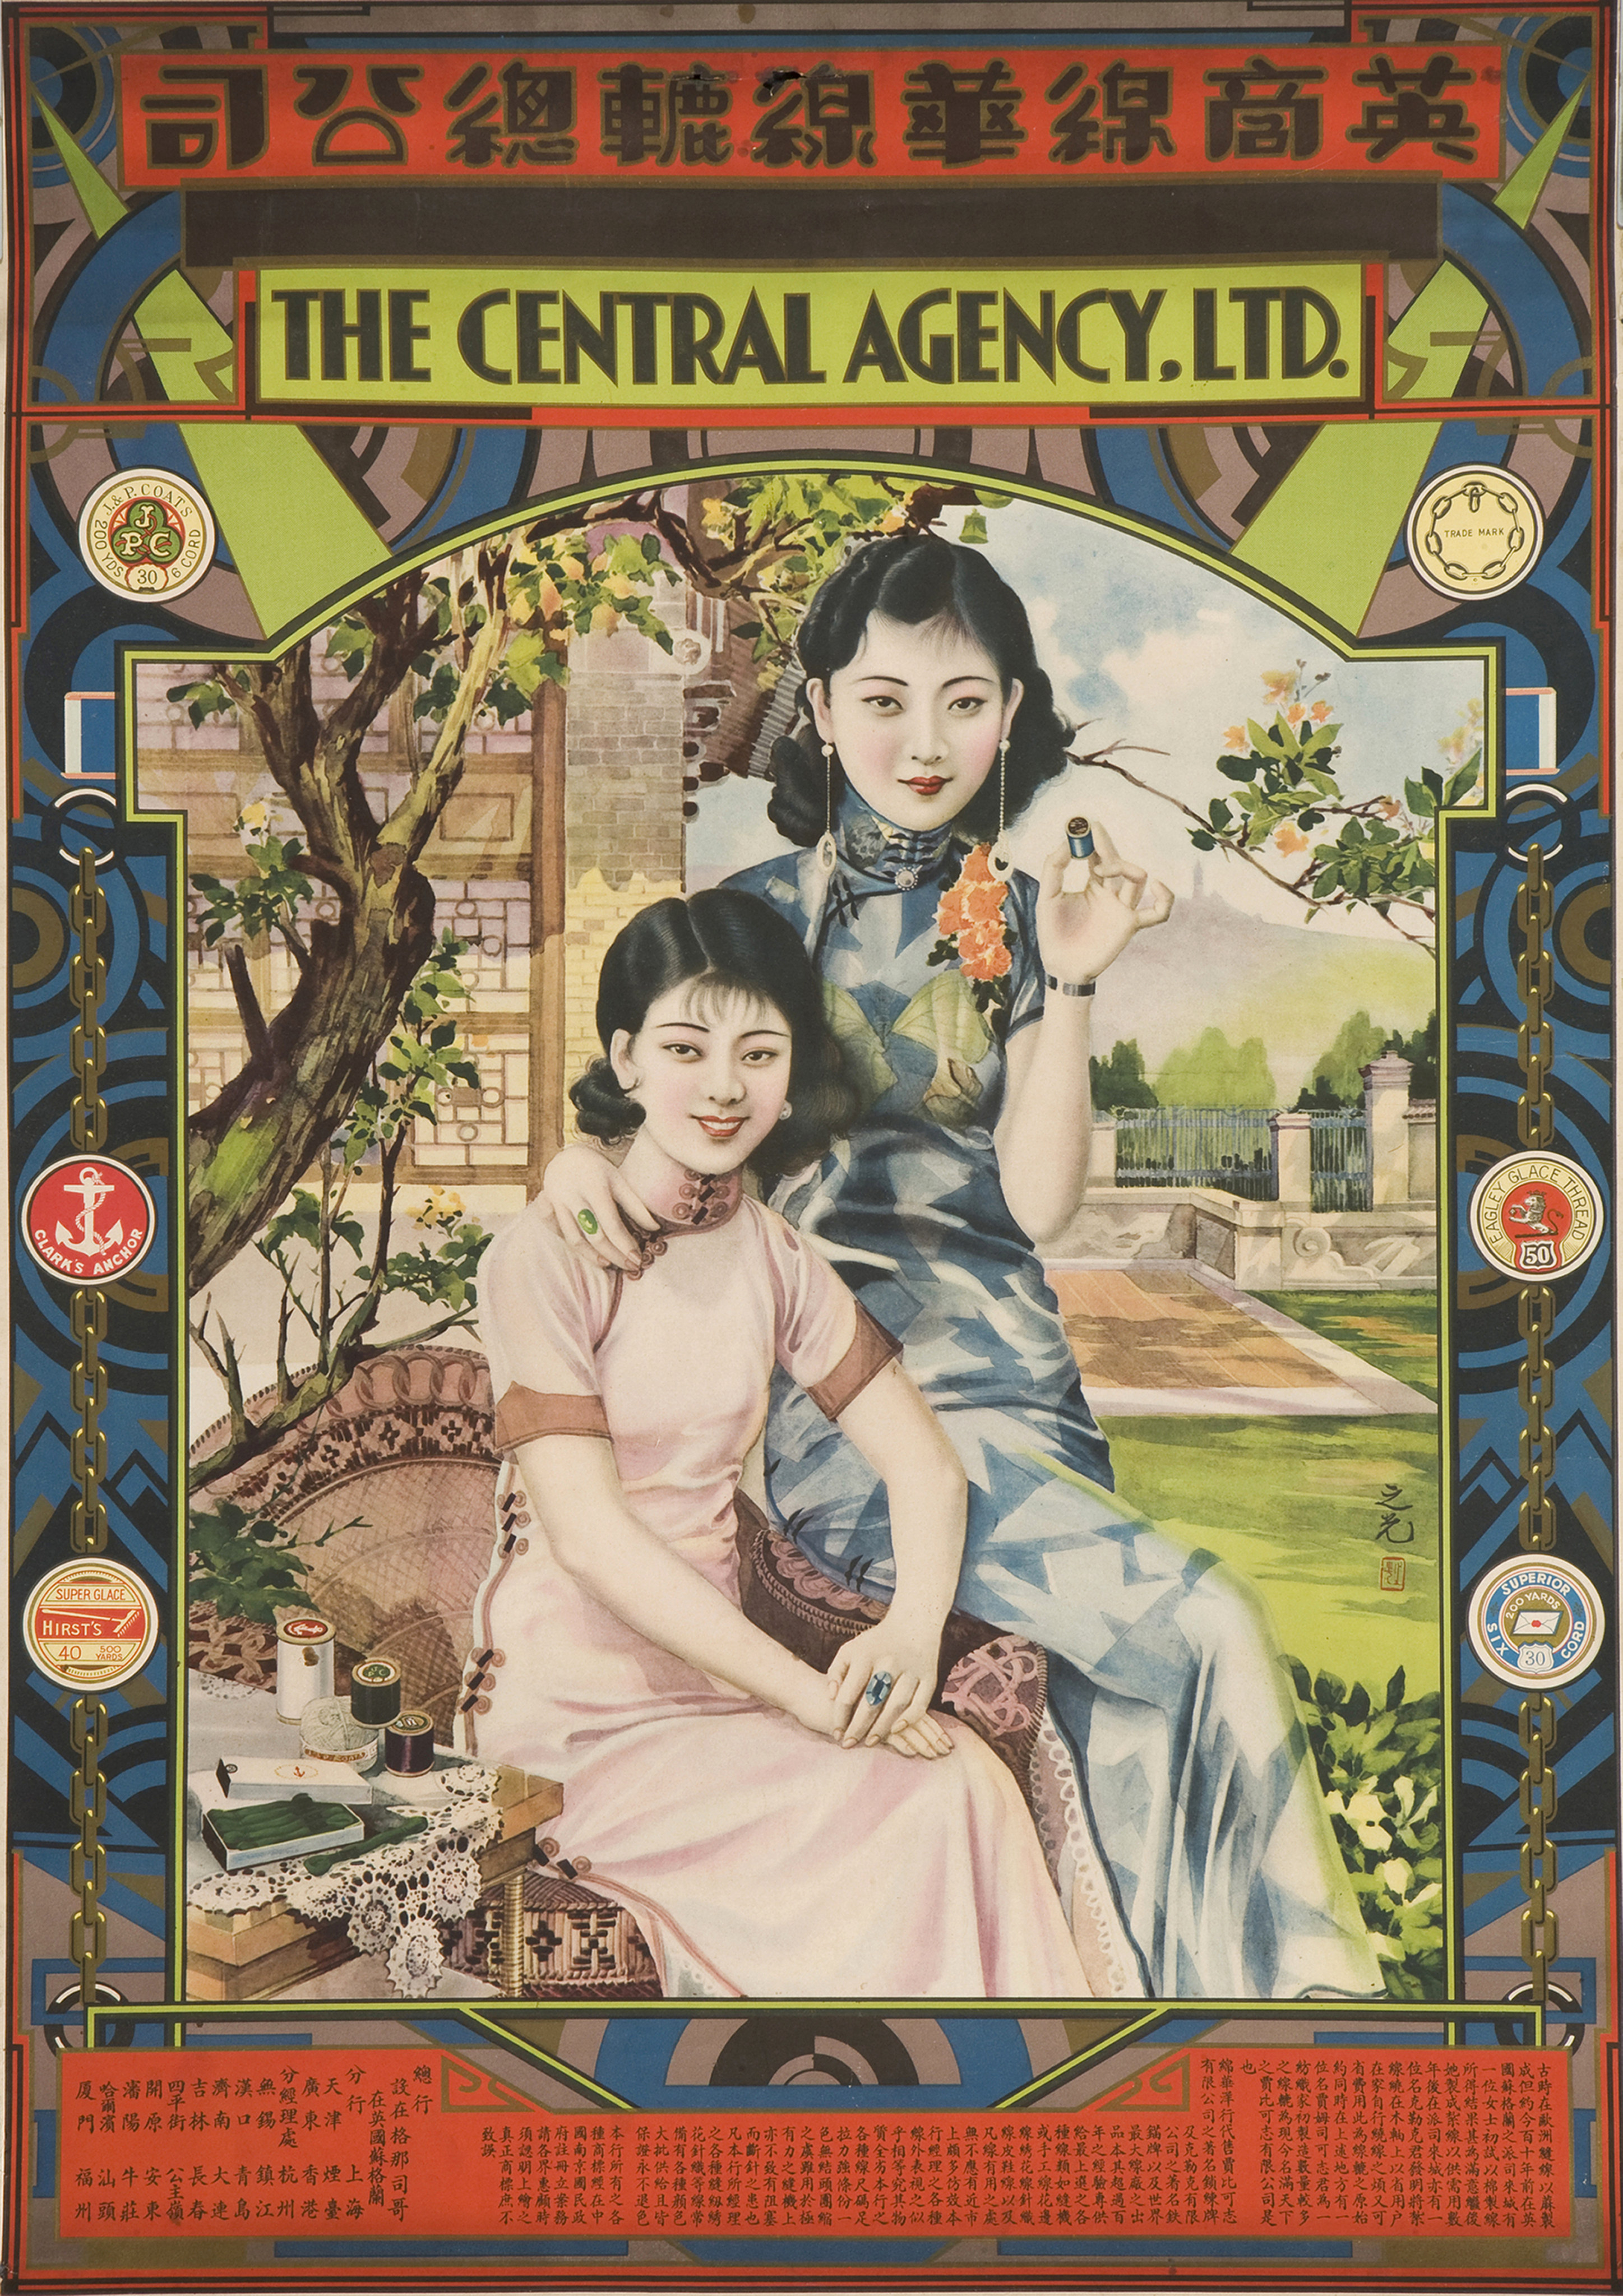 Two Beauties in the Garden (1930) by Xie Zhiguang, a Shanghai Art Academy graduate. Photo: Getty Images